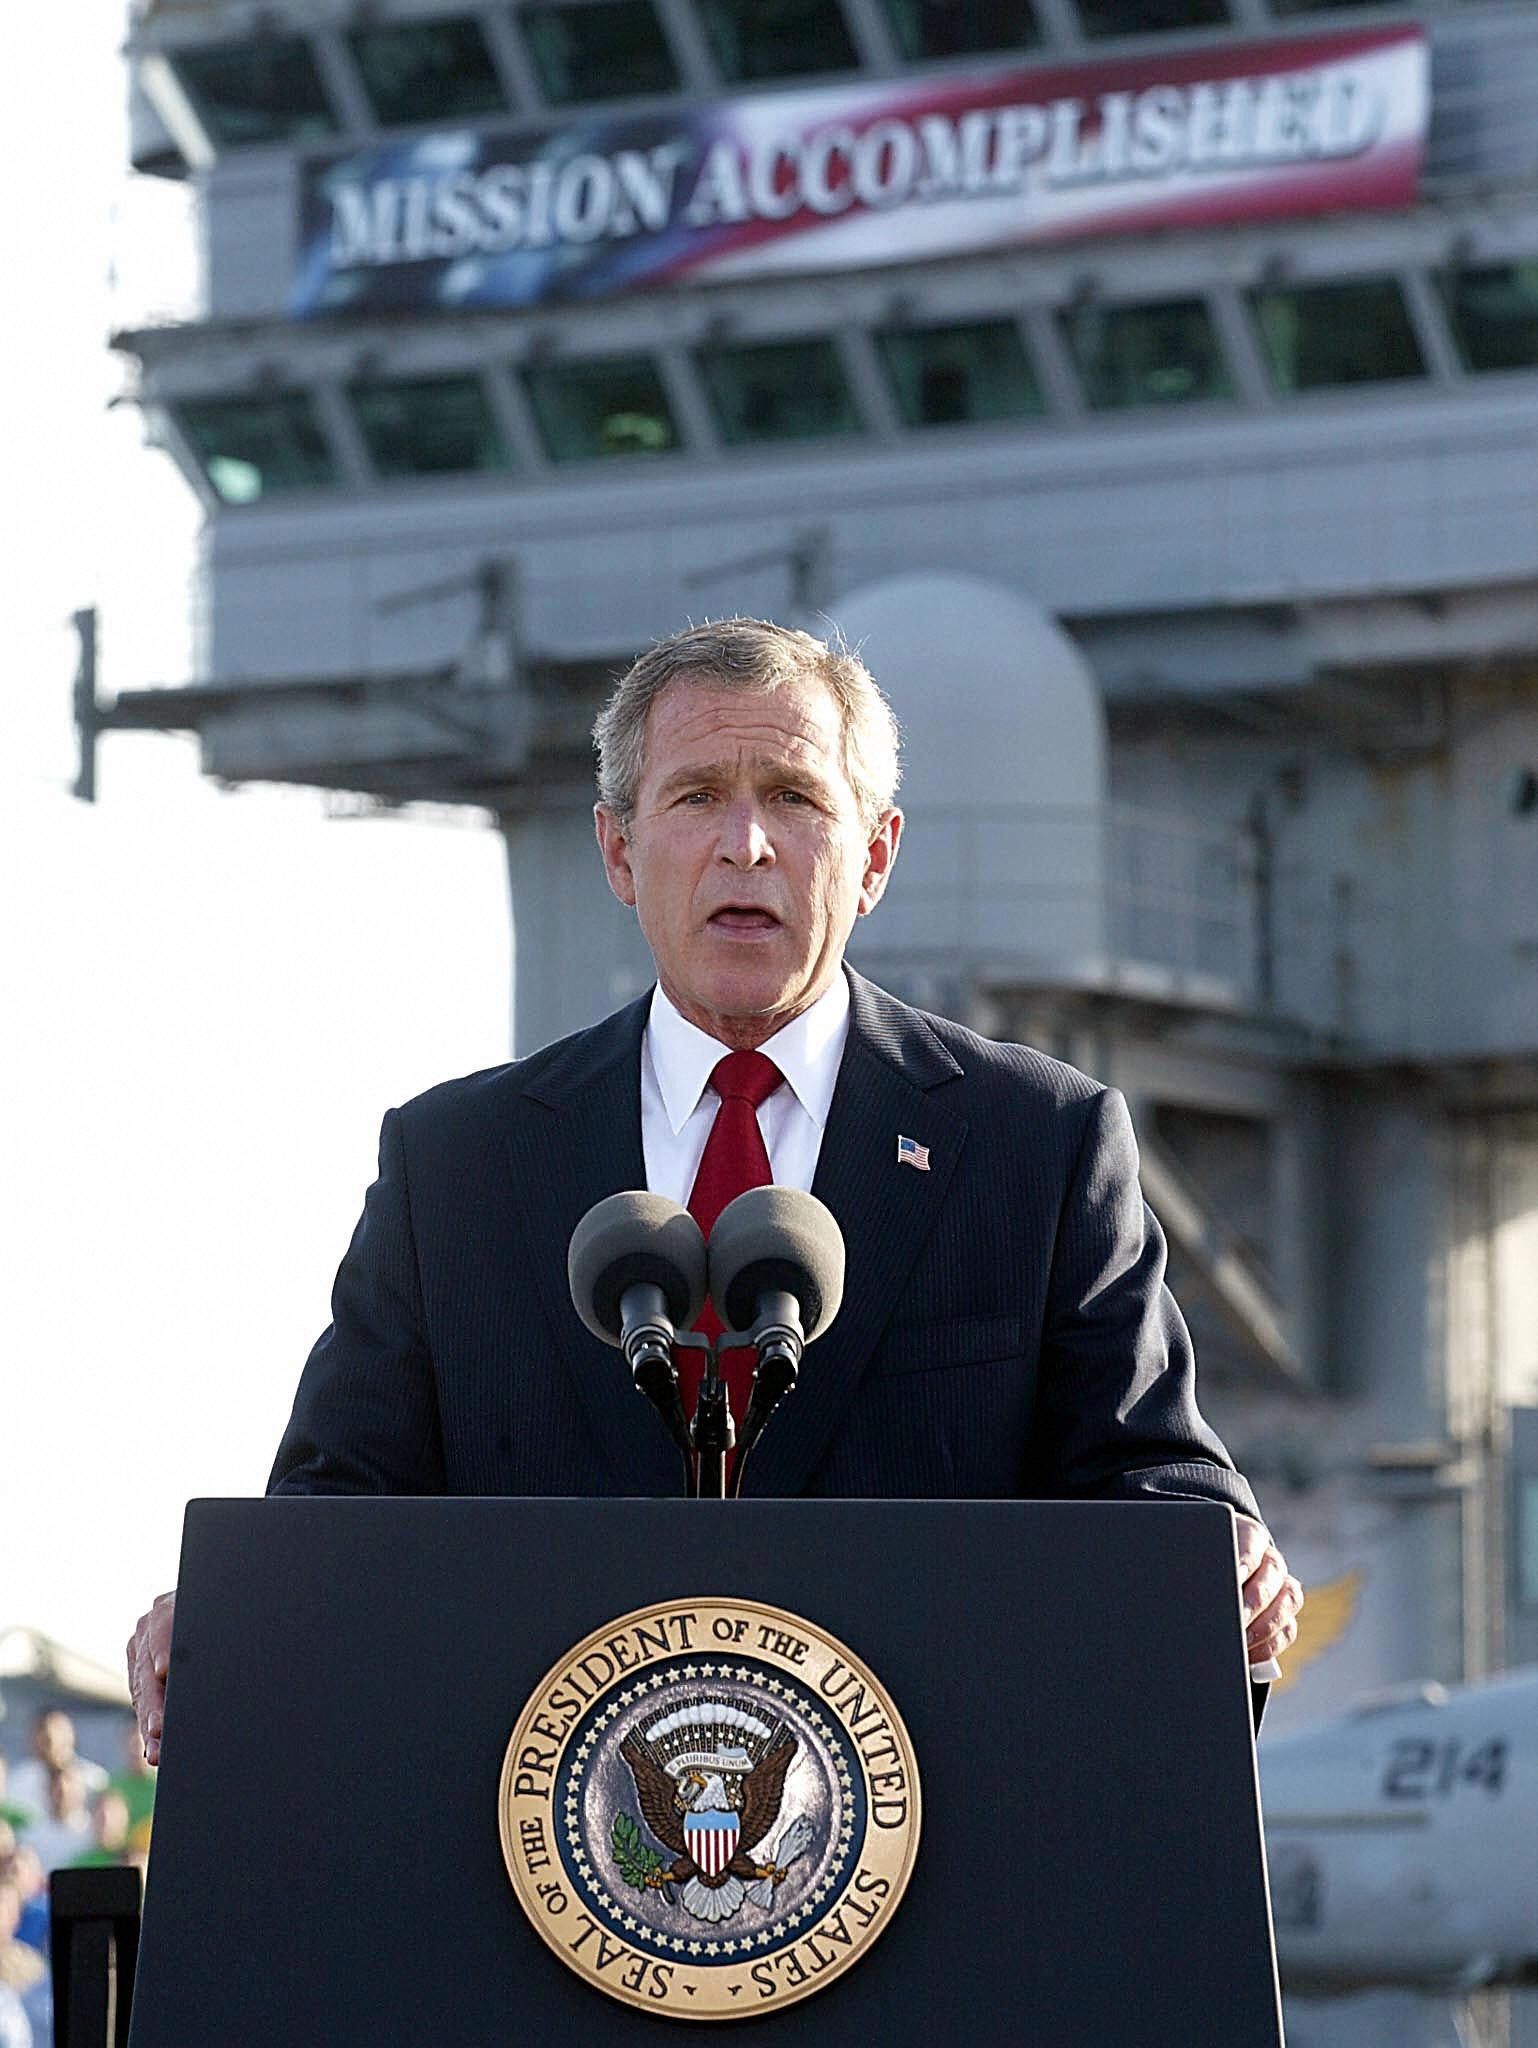 George W Bush aboard aircraft carrier USS Abraham Lincoln in front of a ‘Mission Accomplished’ banner